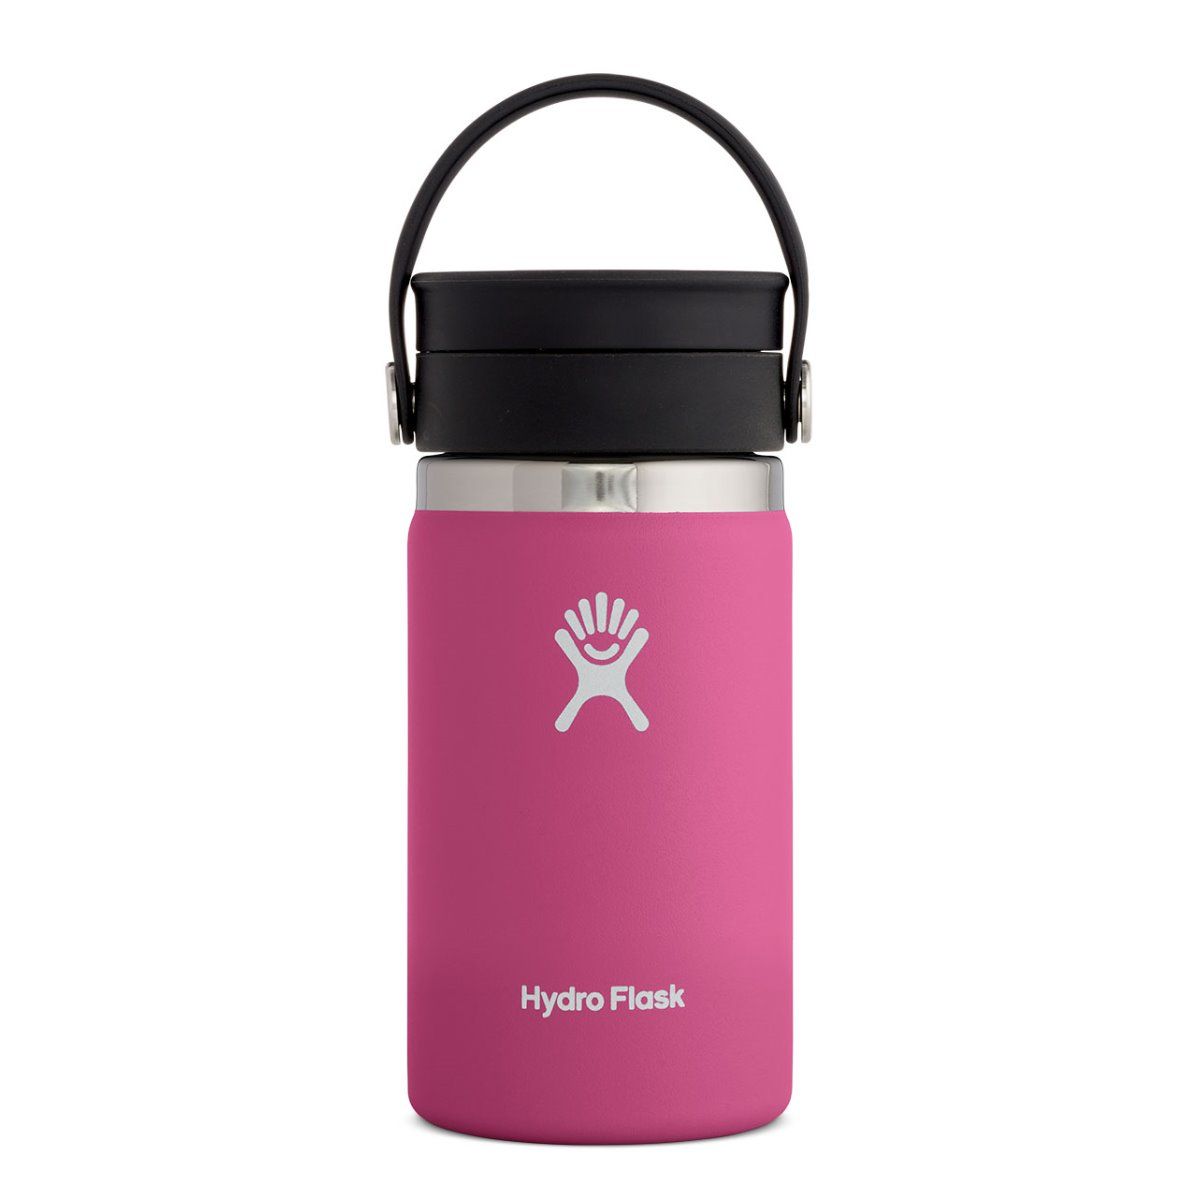 Hydro Flask - 12oz. Vacuum Insulated Stainless Steel Sip Lid Coffee Flask All Things Being Eco Chilliwack Carnation